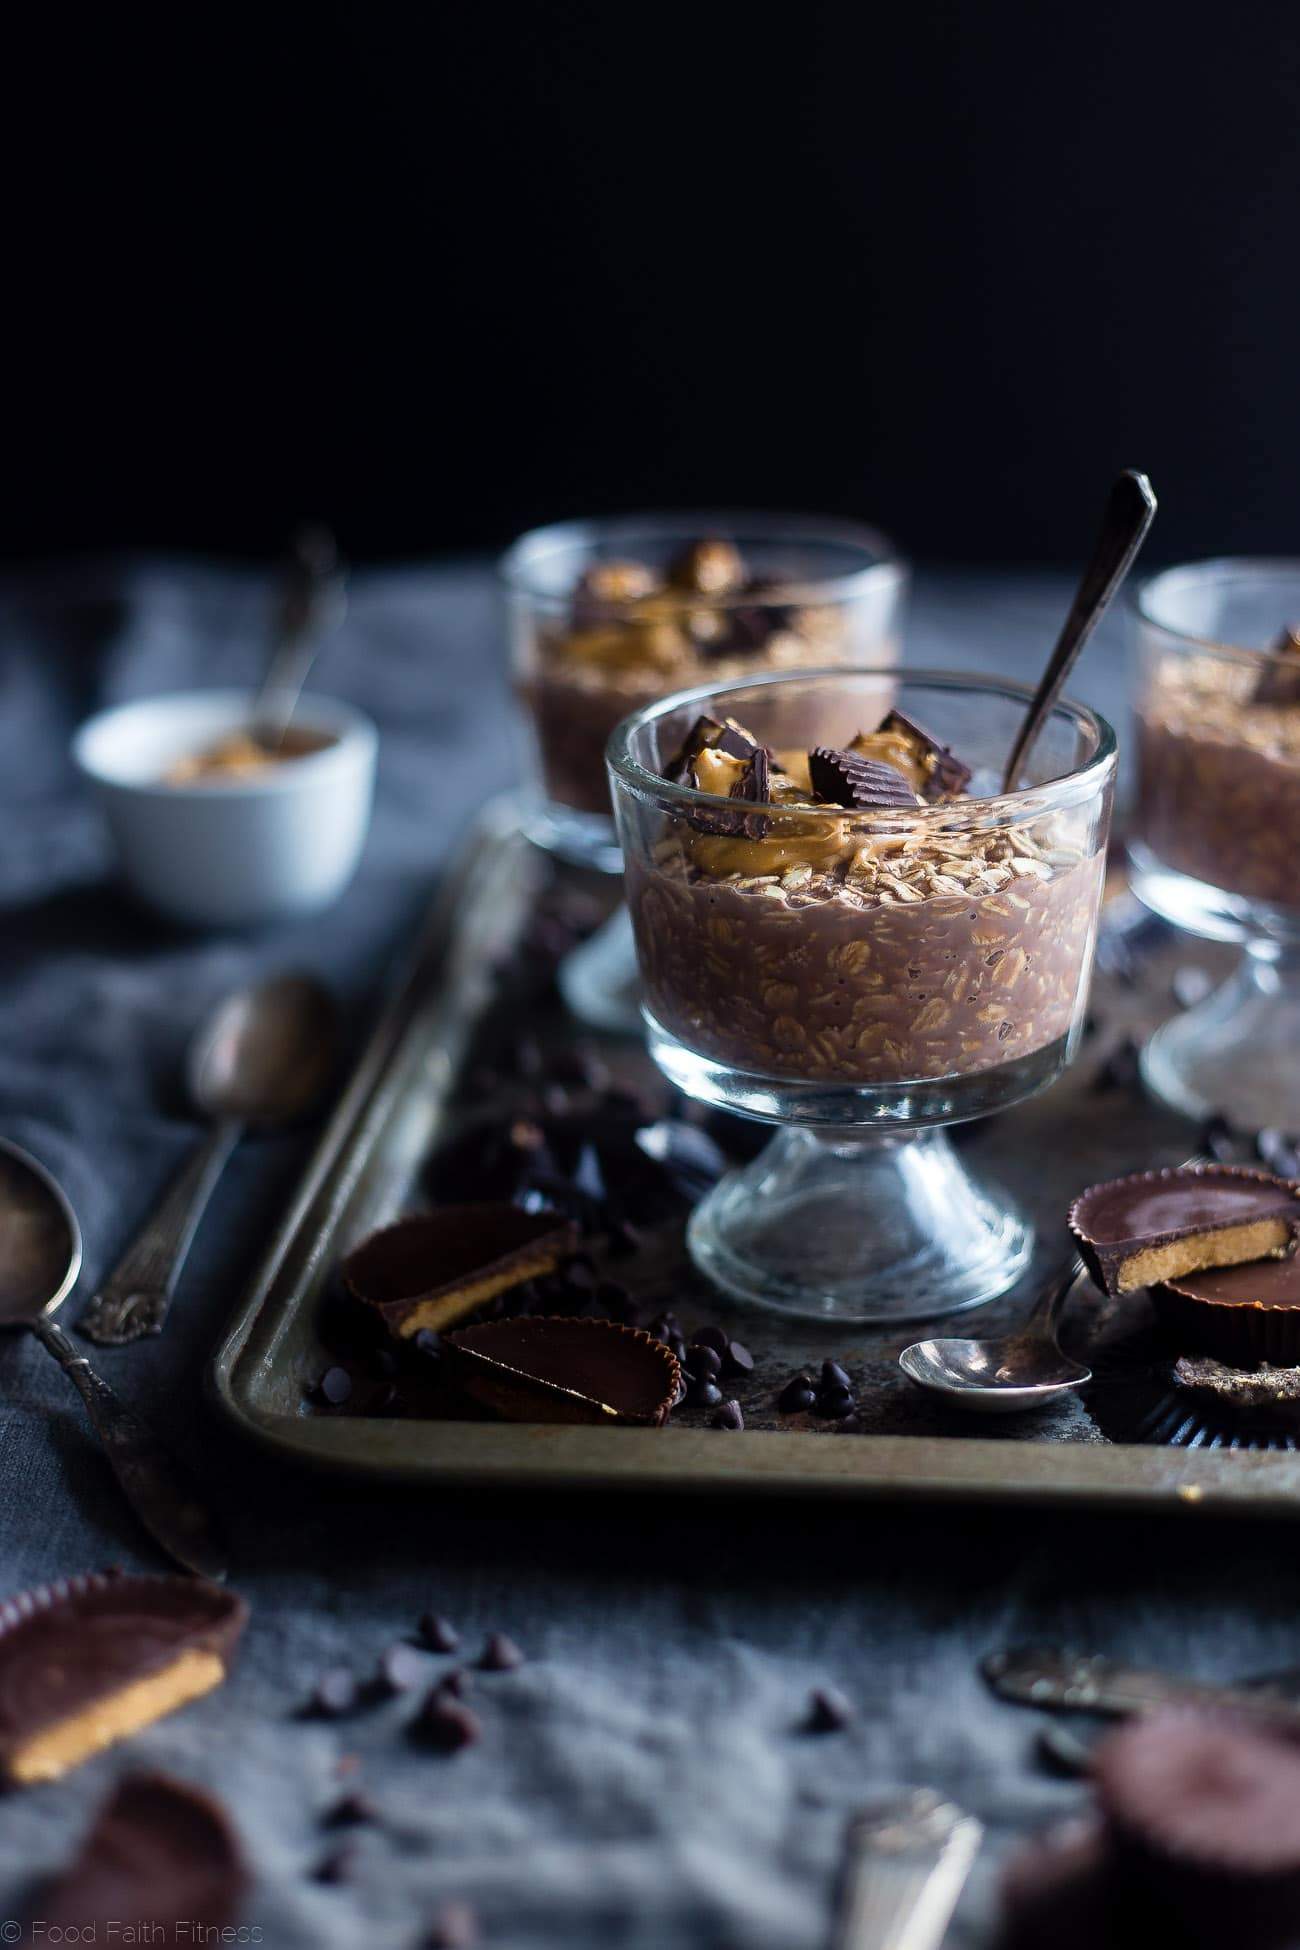 Chocolate Peanut Butter Overnight Oats - This 6-ingredient overnight oatmeal recipe is topped with homemade peanut butter cups! They're an easy, healthy, gluten free and protein-packed make-ahead breakfast! | Foodfaithfitness.com | @FoodFaithFit